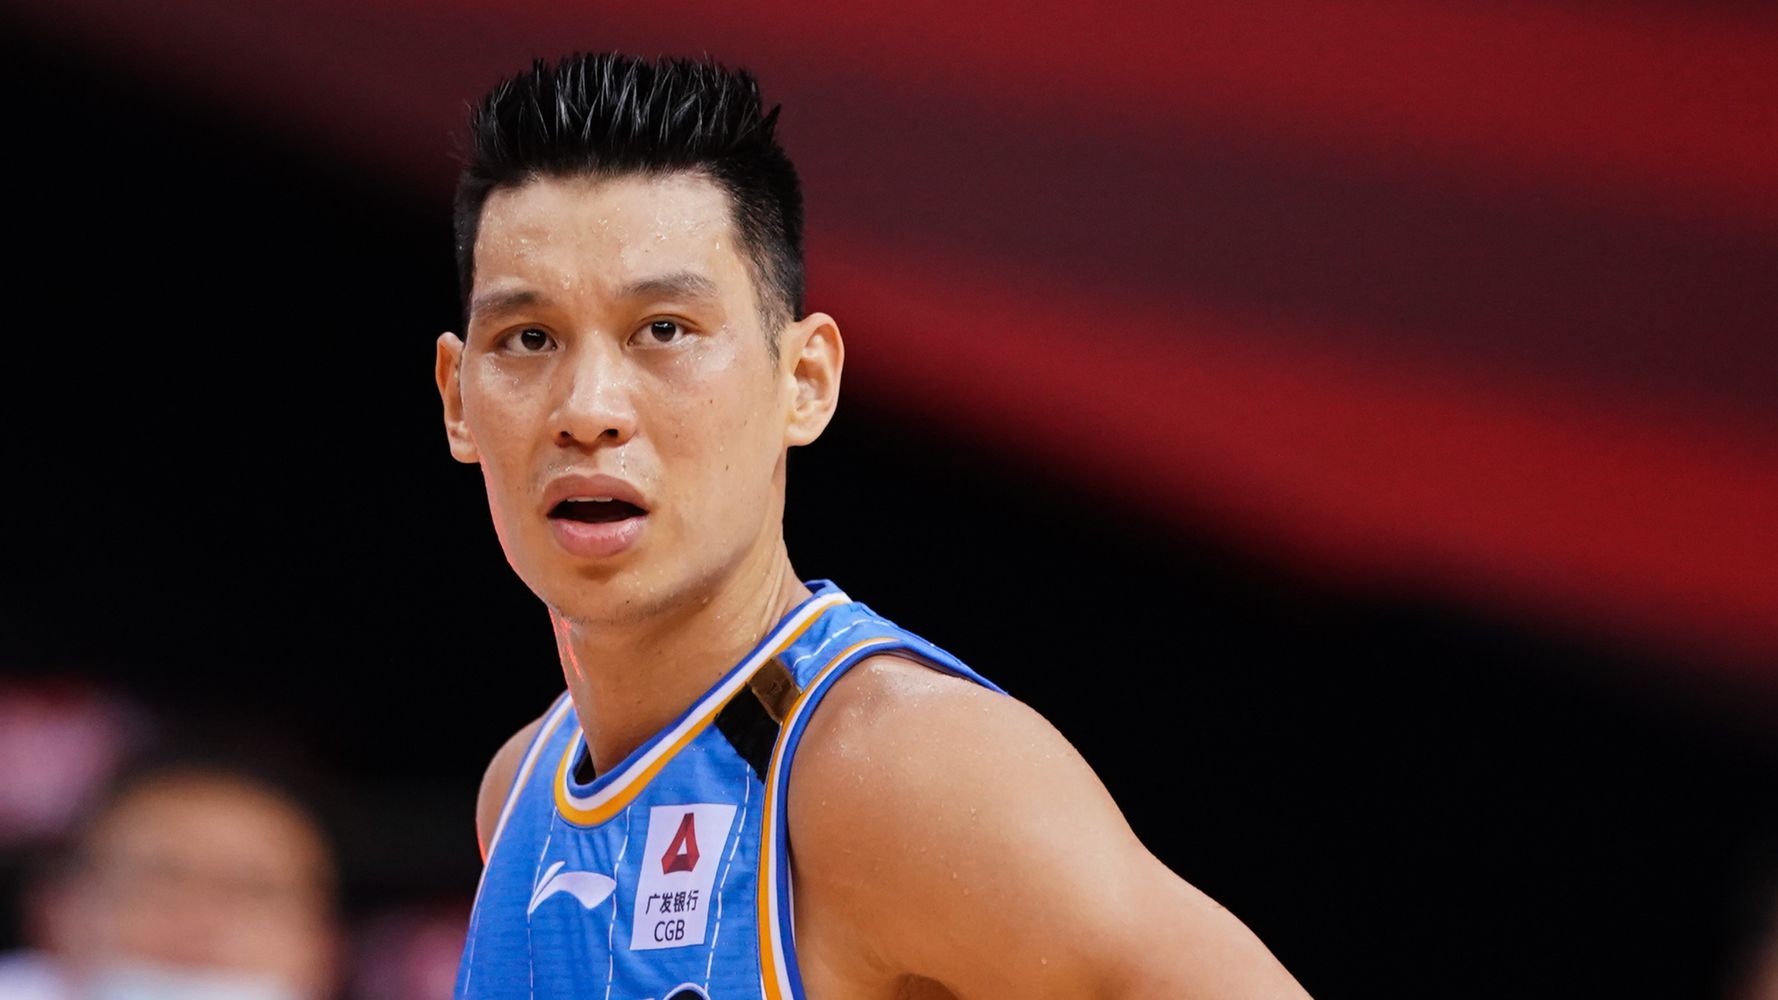 Jeremy Lin Says He's Not 'Naming Or Shaming' Person Who Called Him 'Coronavirus' - HuffPost